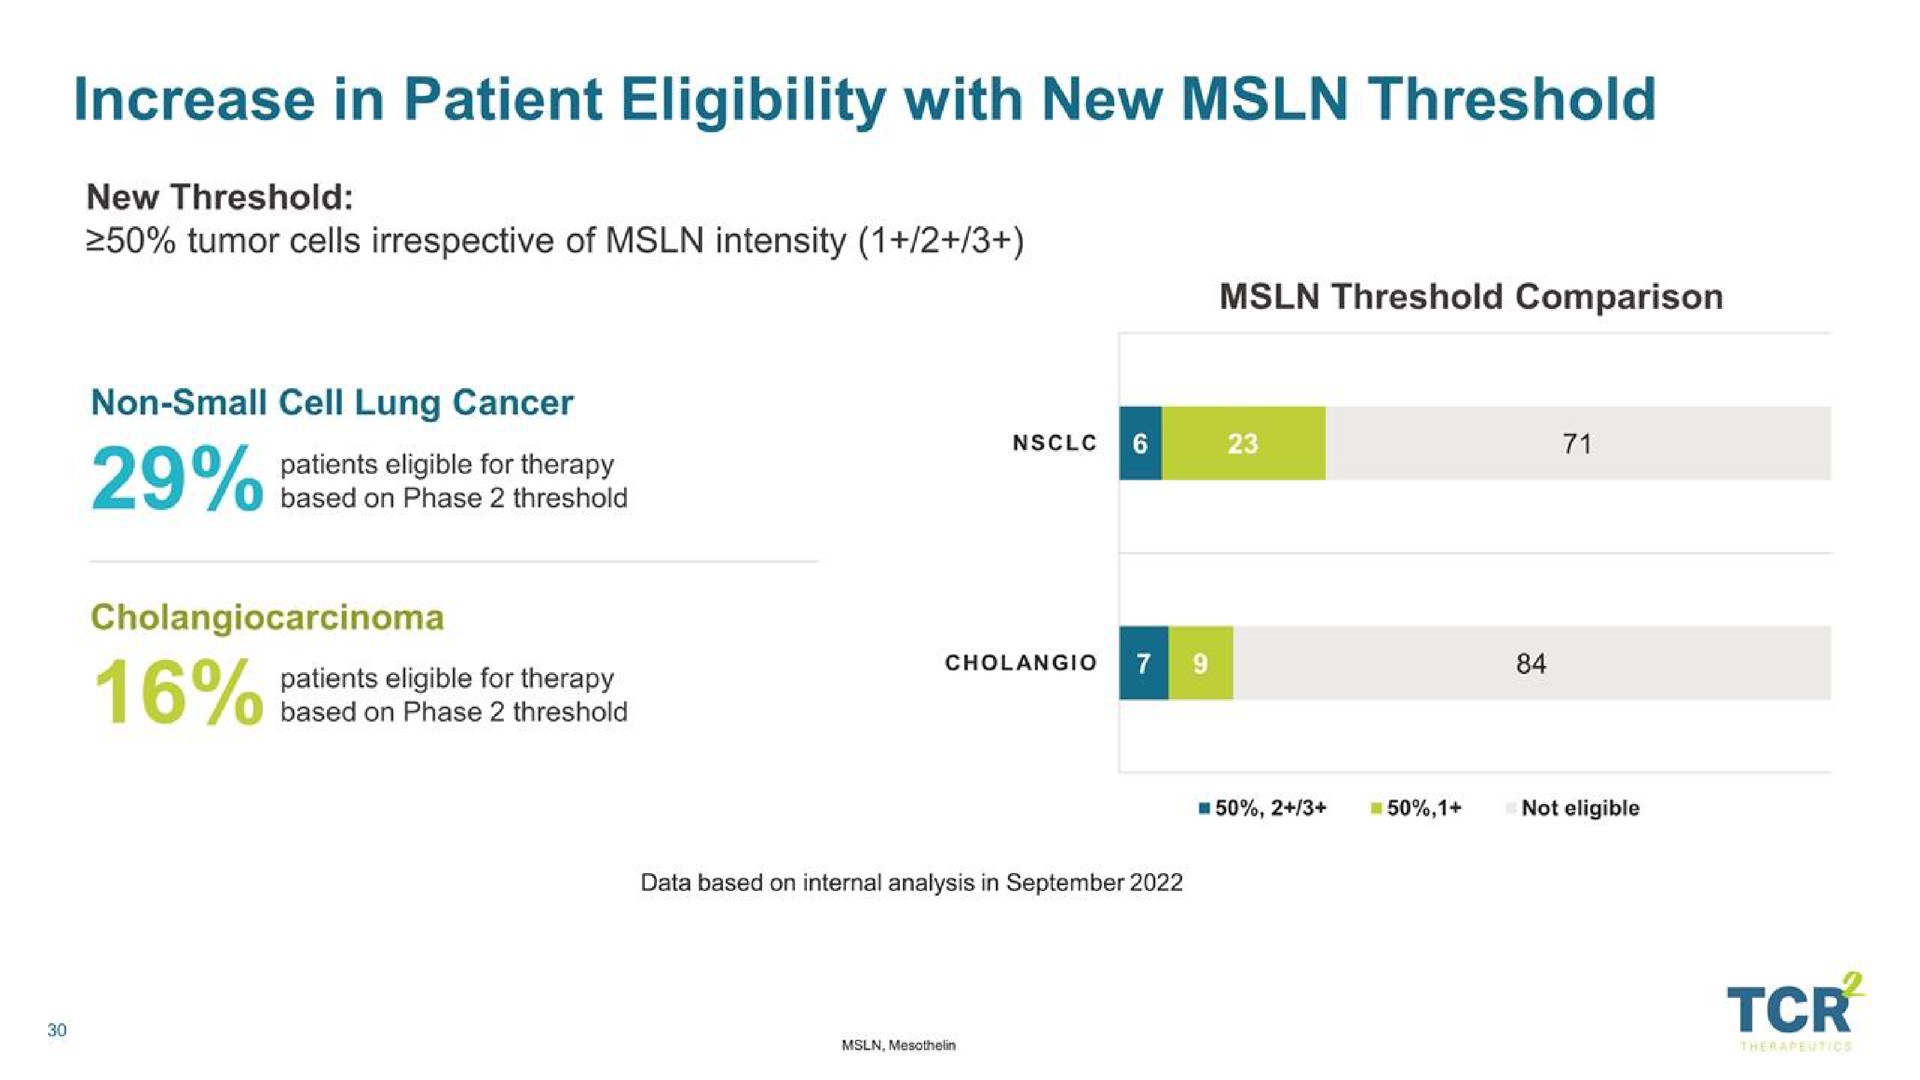 increase in patient eligibility with new threshold | TCR2 Therapeutics